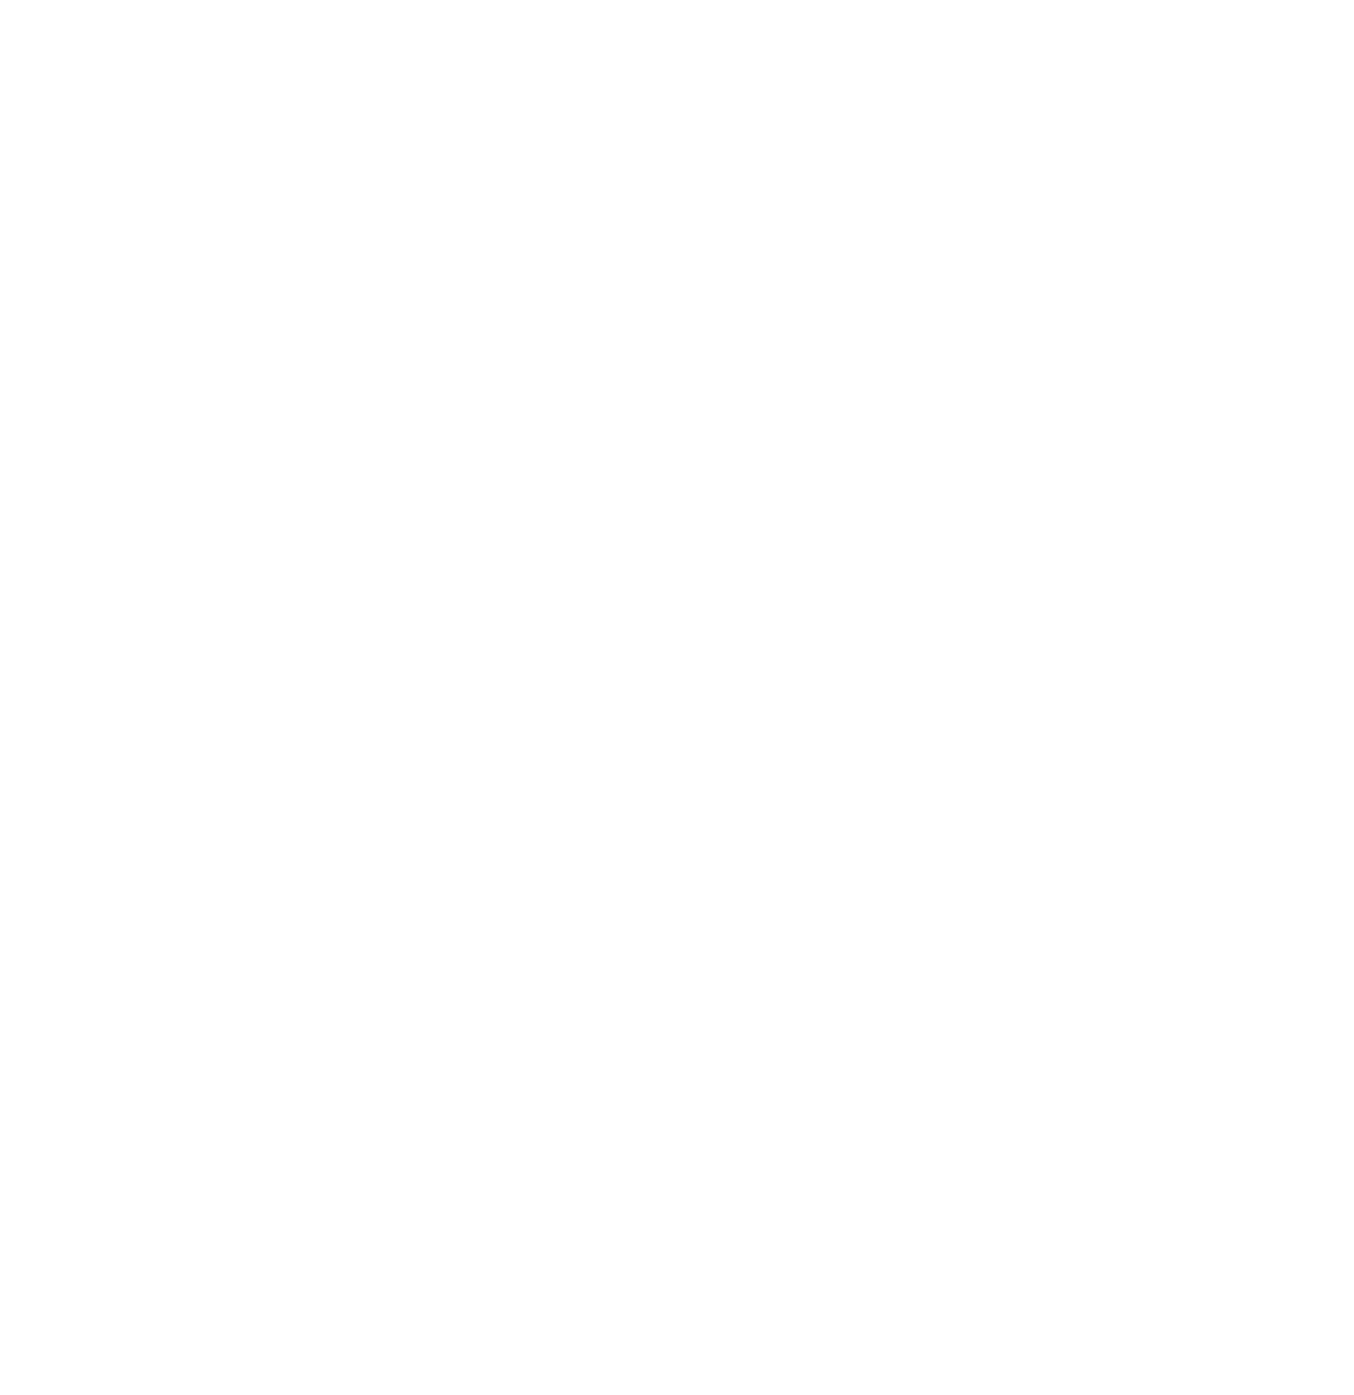 The Christian Campus House